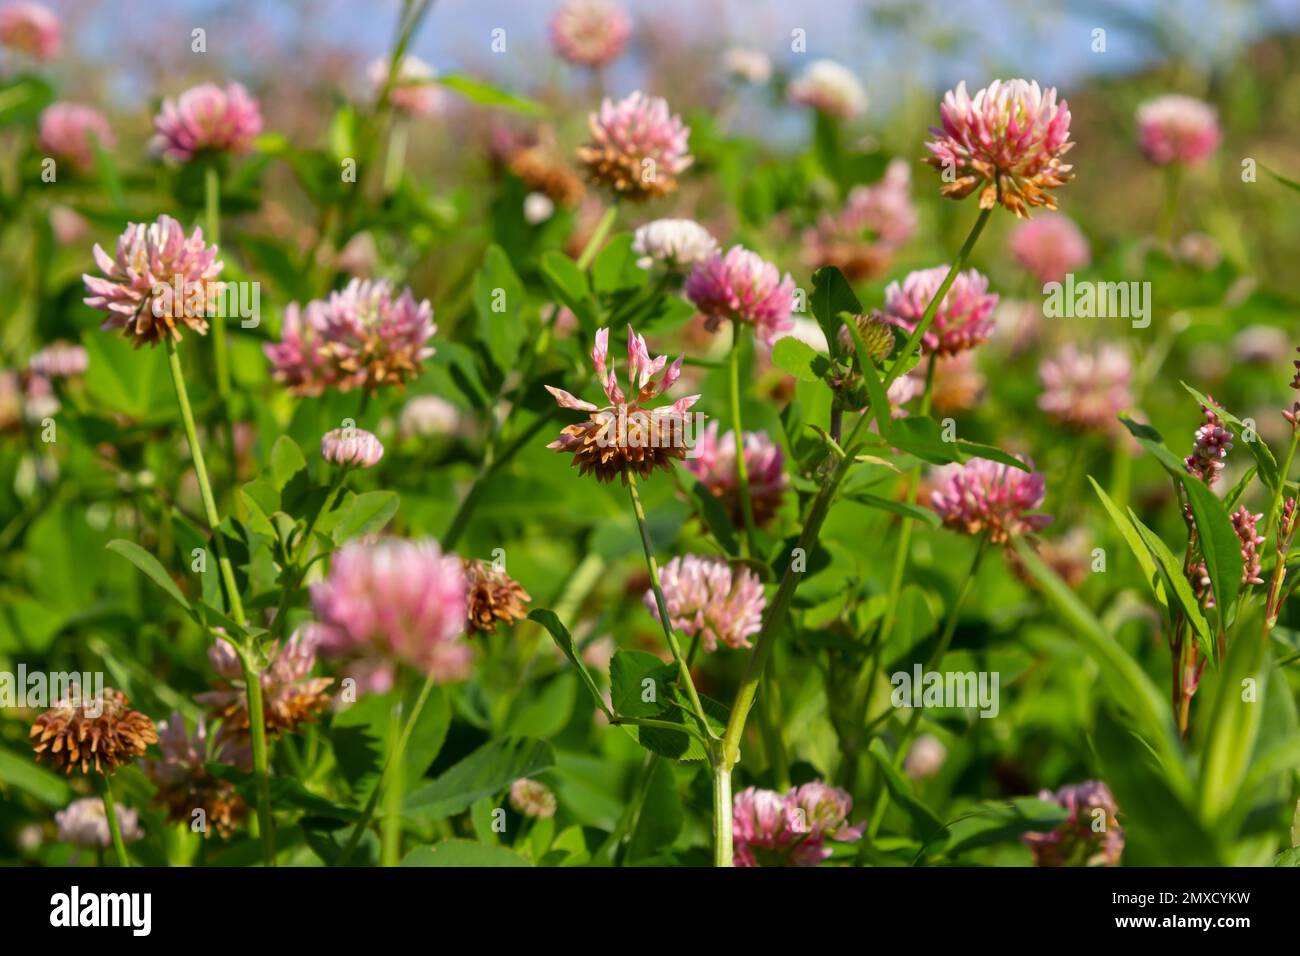 Beautiful white, pink and green floral meadow landscape full of Alsike clover trifolium hybridum. Pale pink and whitish flowers in summer. Stock Photo